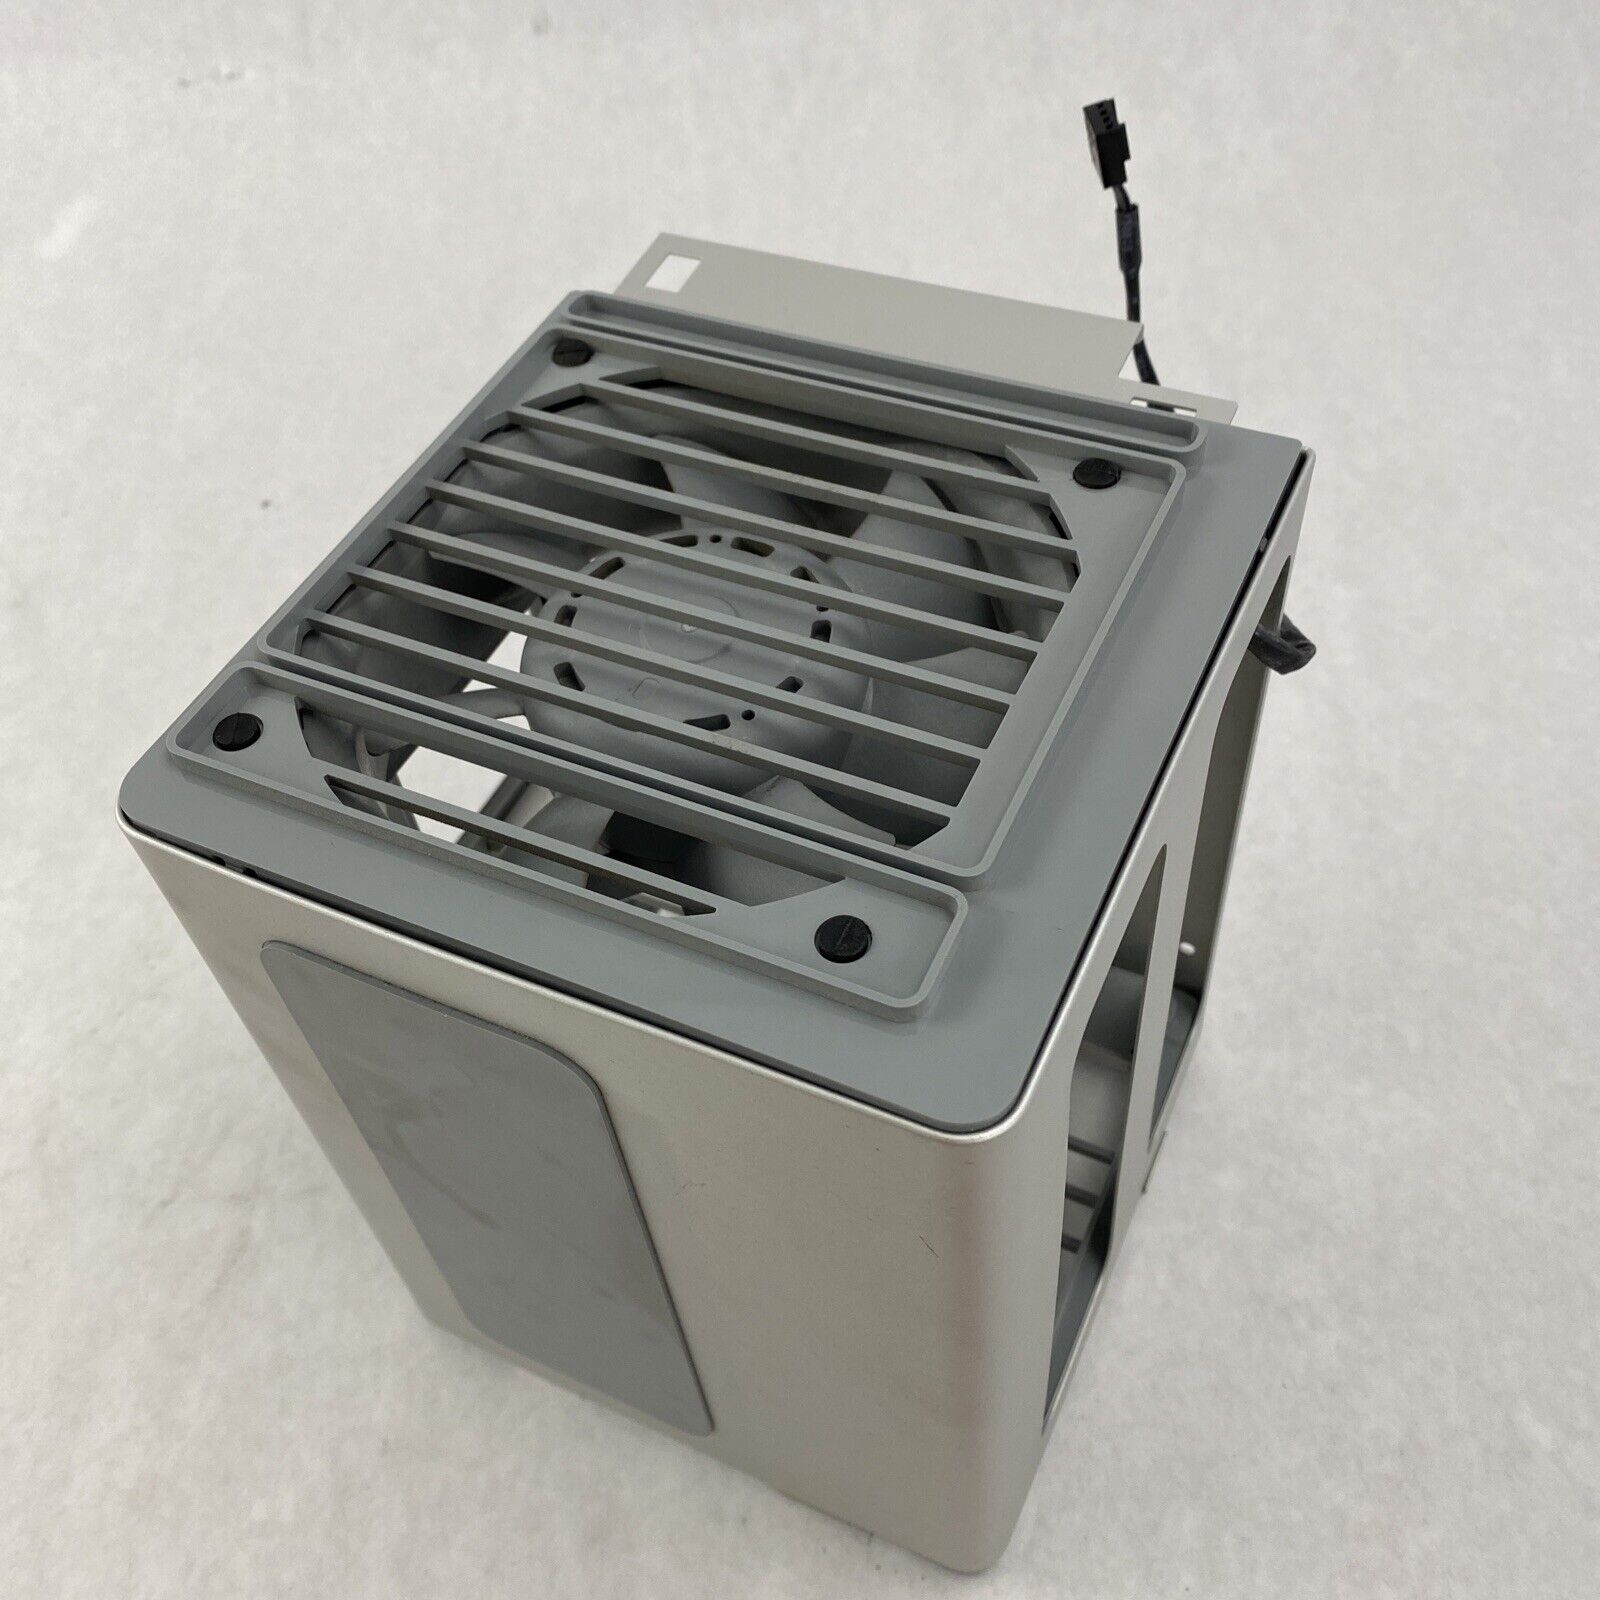 Apple 815-9399 Mac Pro Memory Cage with Rear-Fan-815-9400 UNTESTED